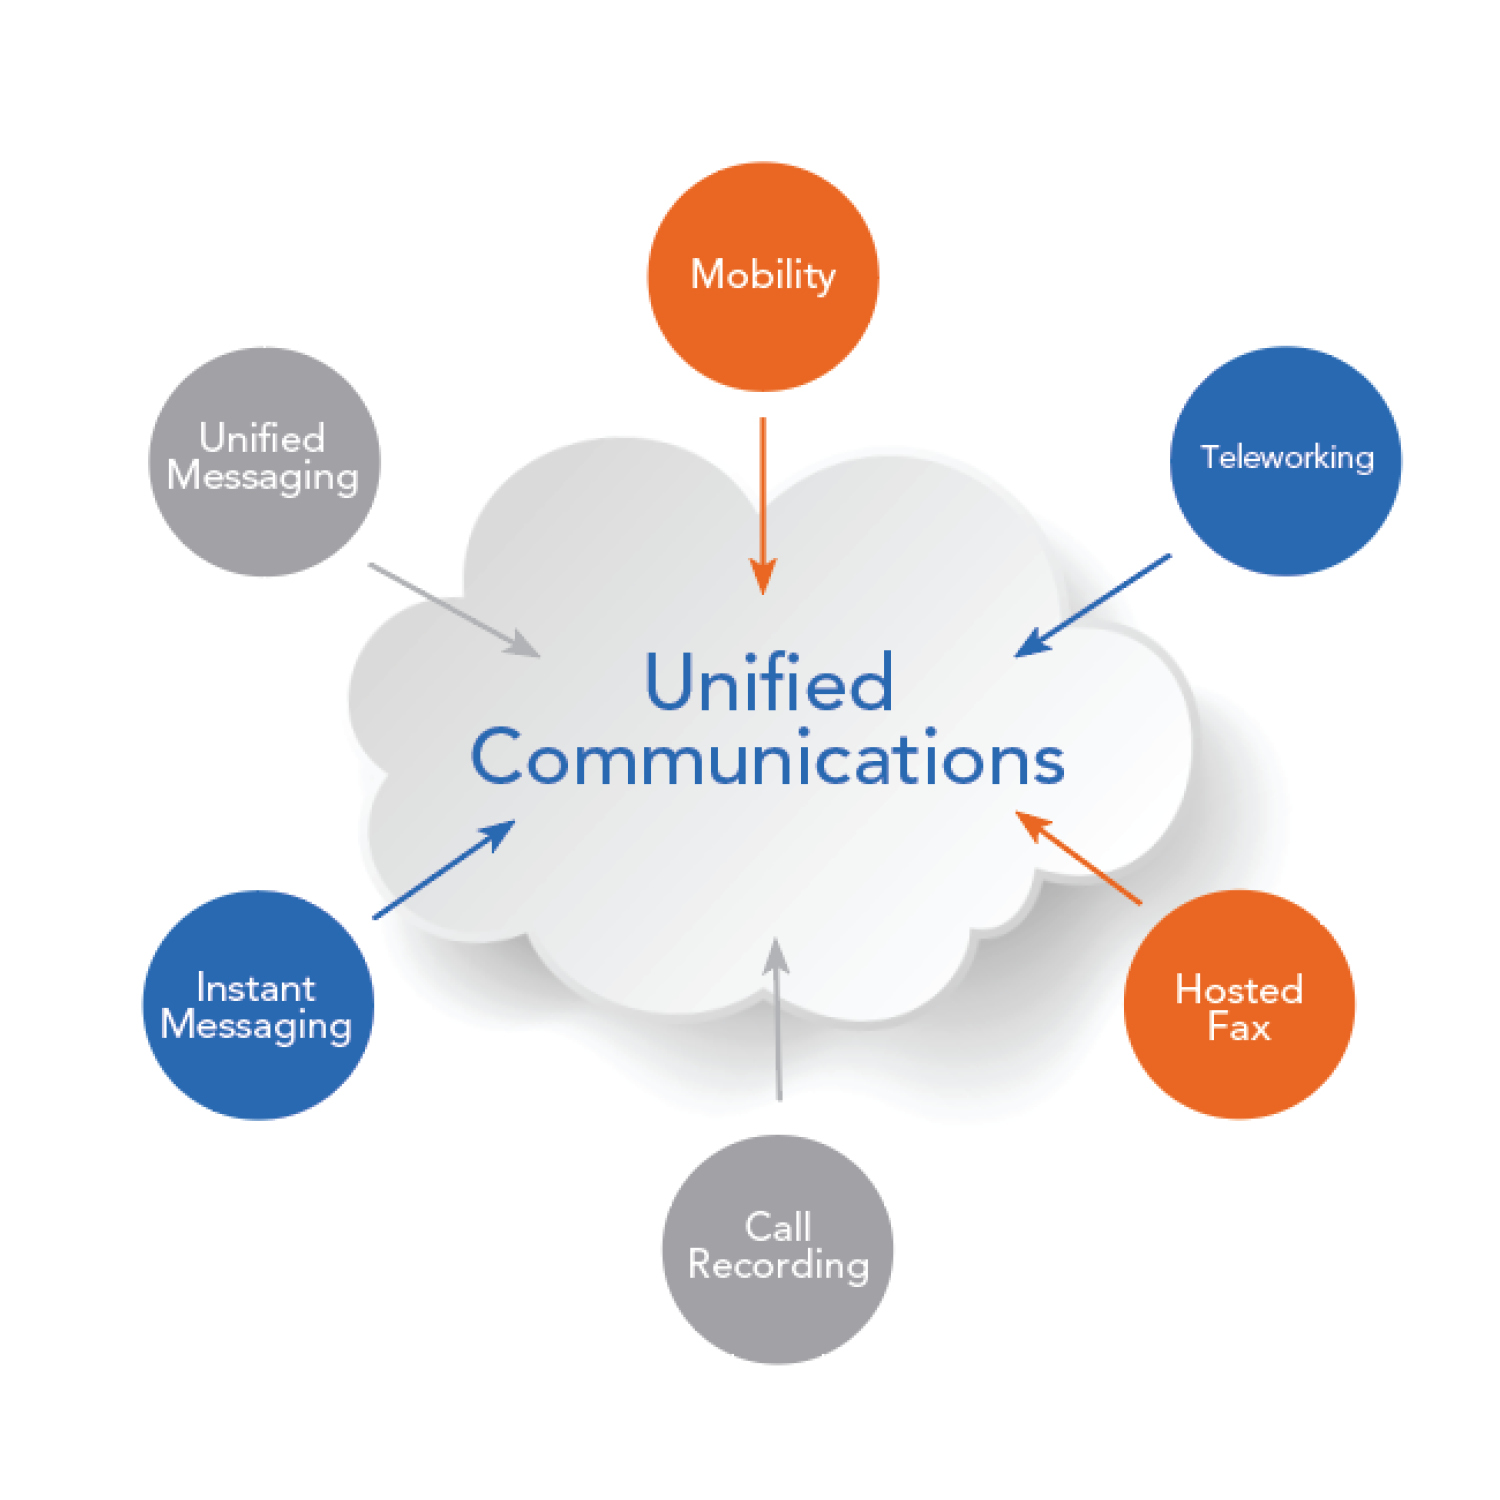 Unified Messaging, Mobility, Audio/Video Conferencing, Call Recording, Hosted Fax, Desktop Sharing, Instant Messaging, Presence, Unified Communications